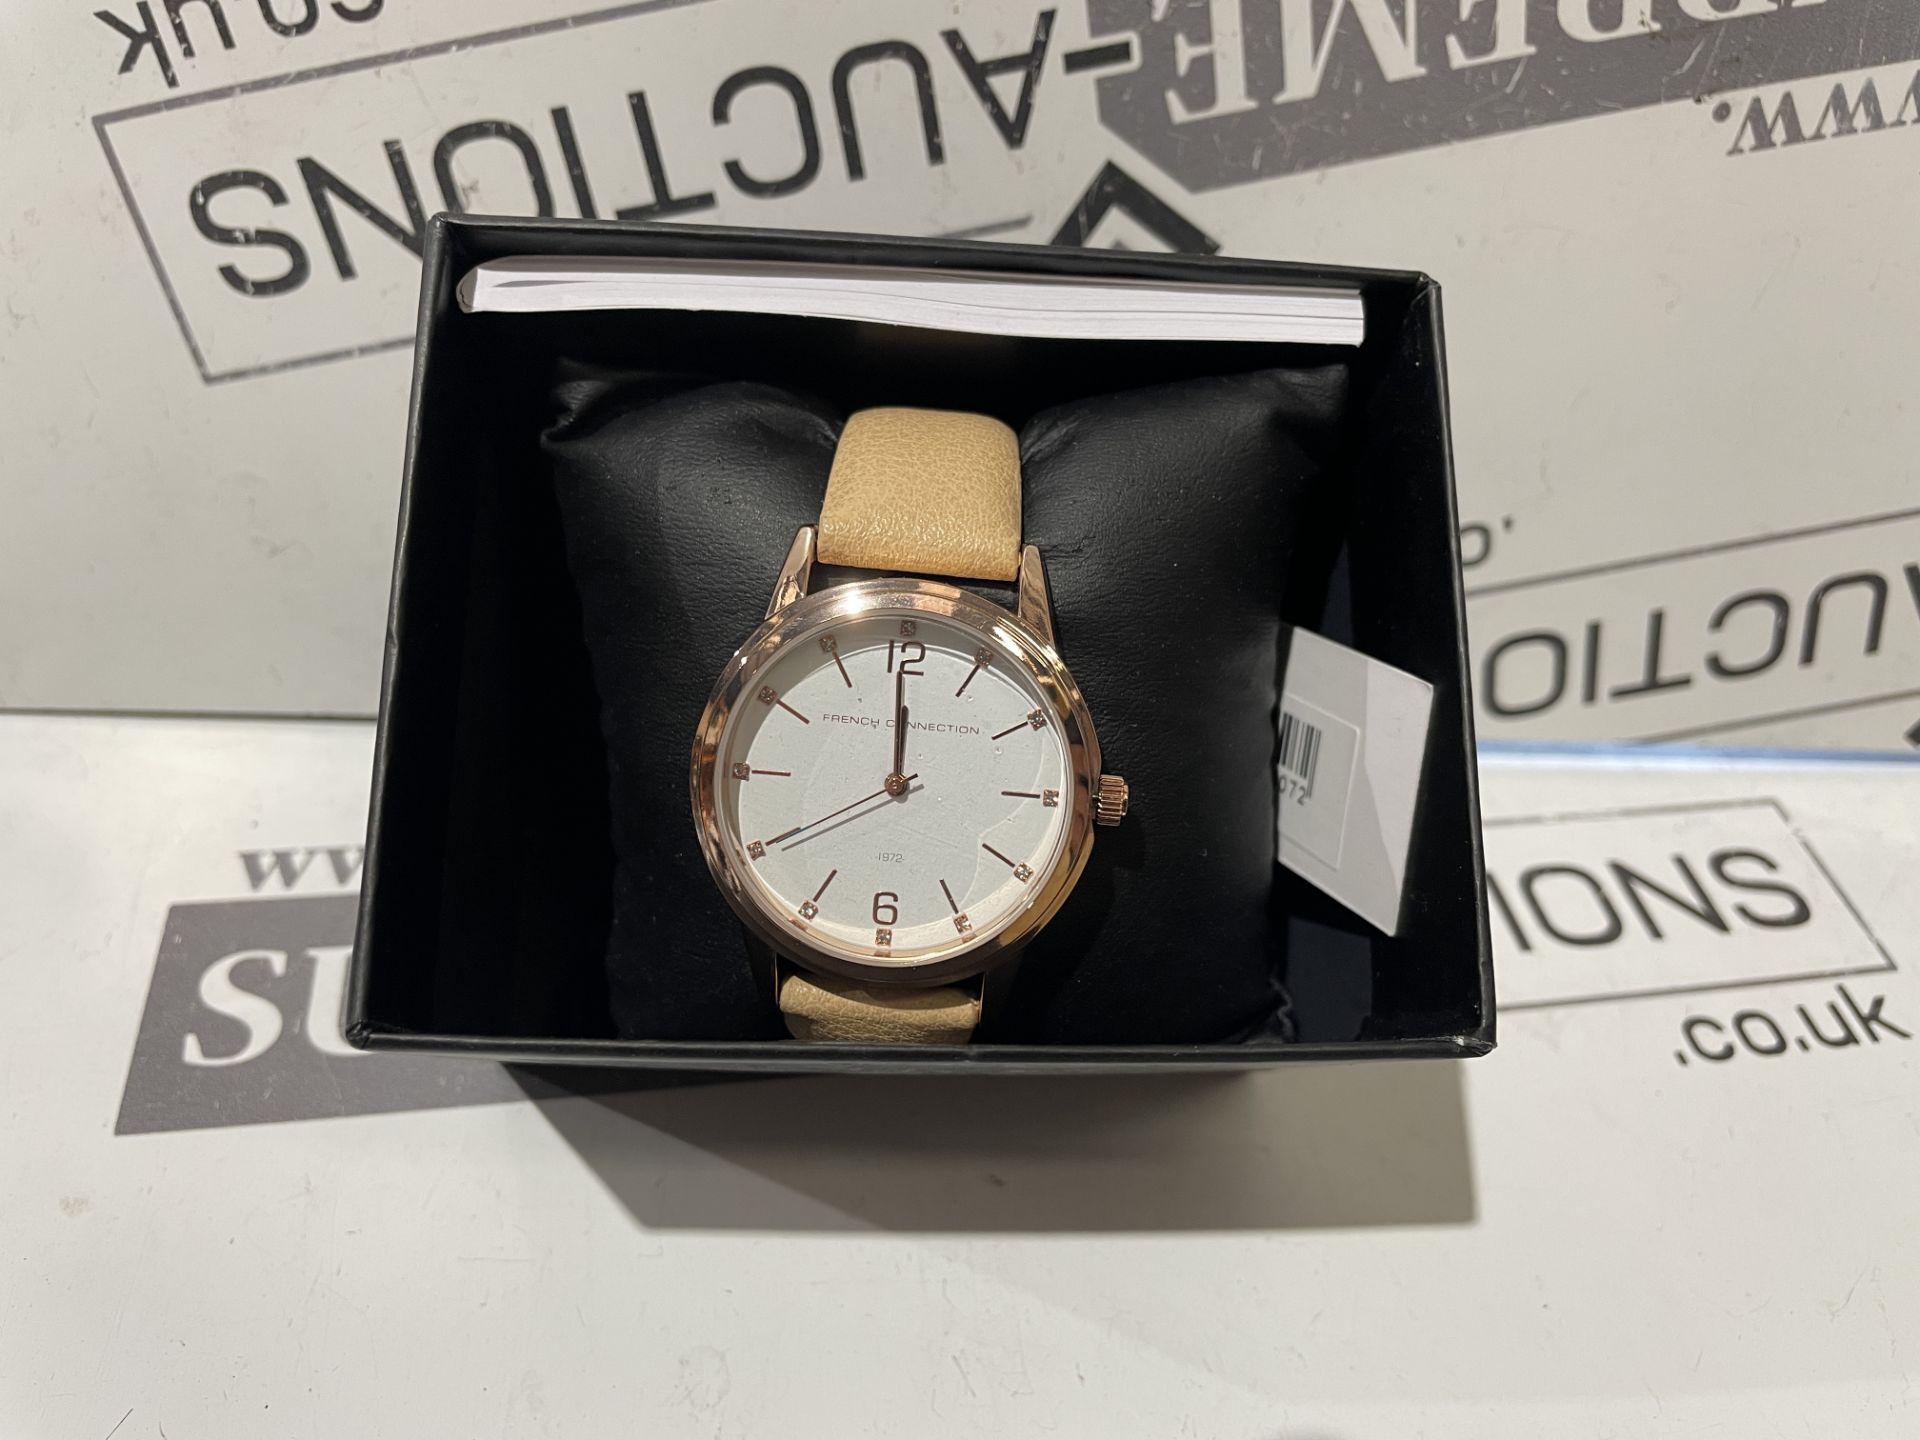 BRAND NEW FRENCH CONNECTION LADIES WRIST WATCH S/R